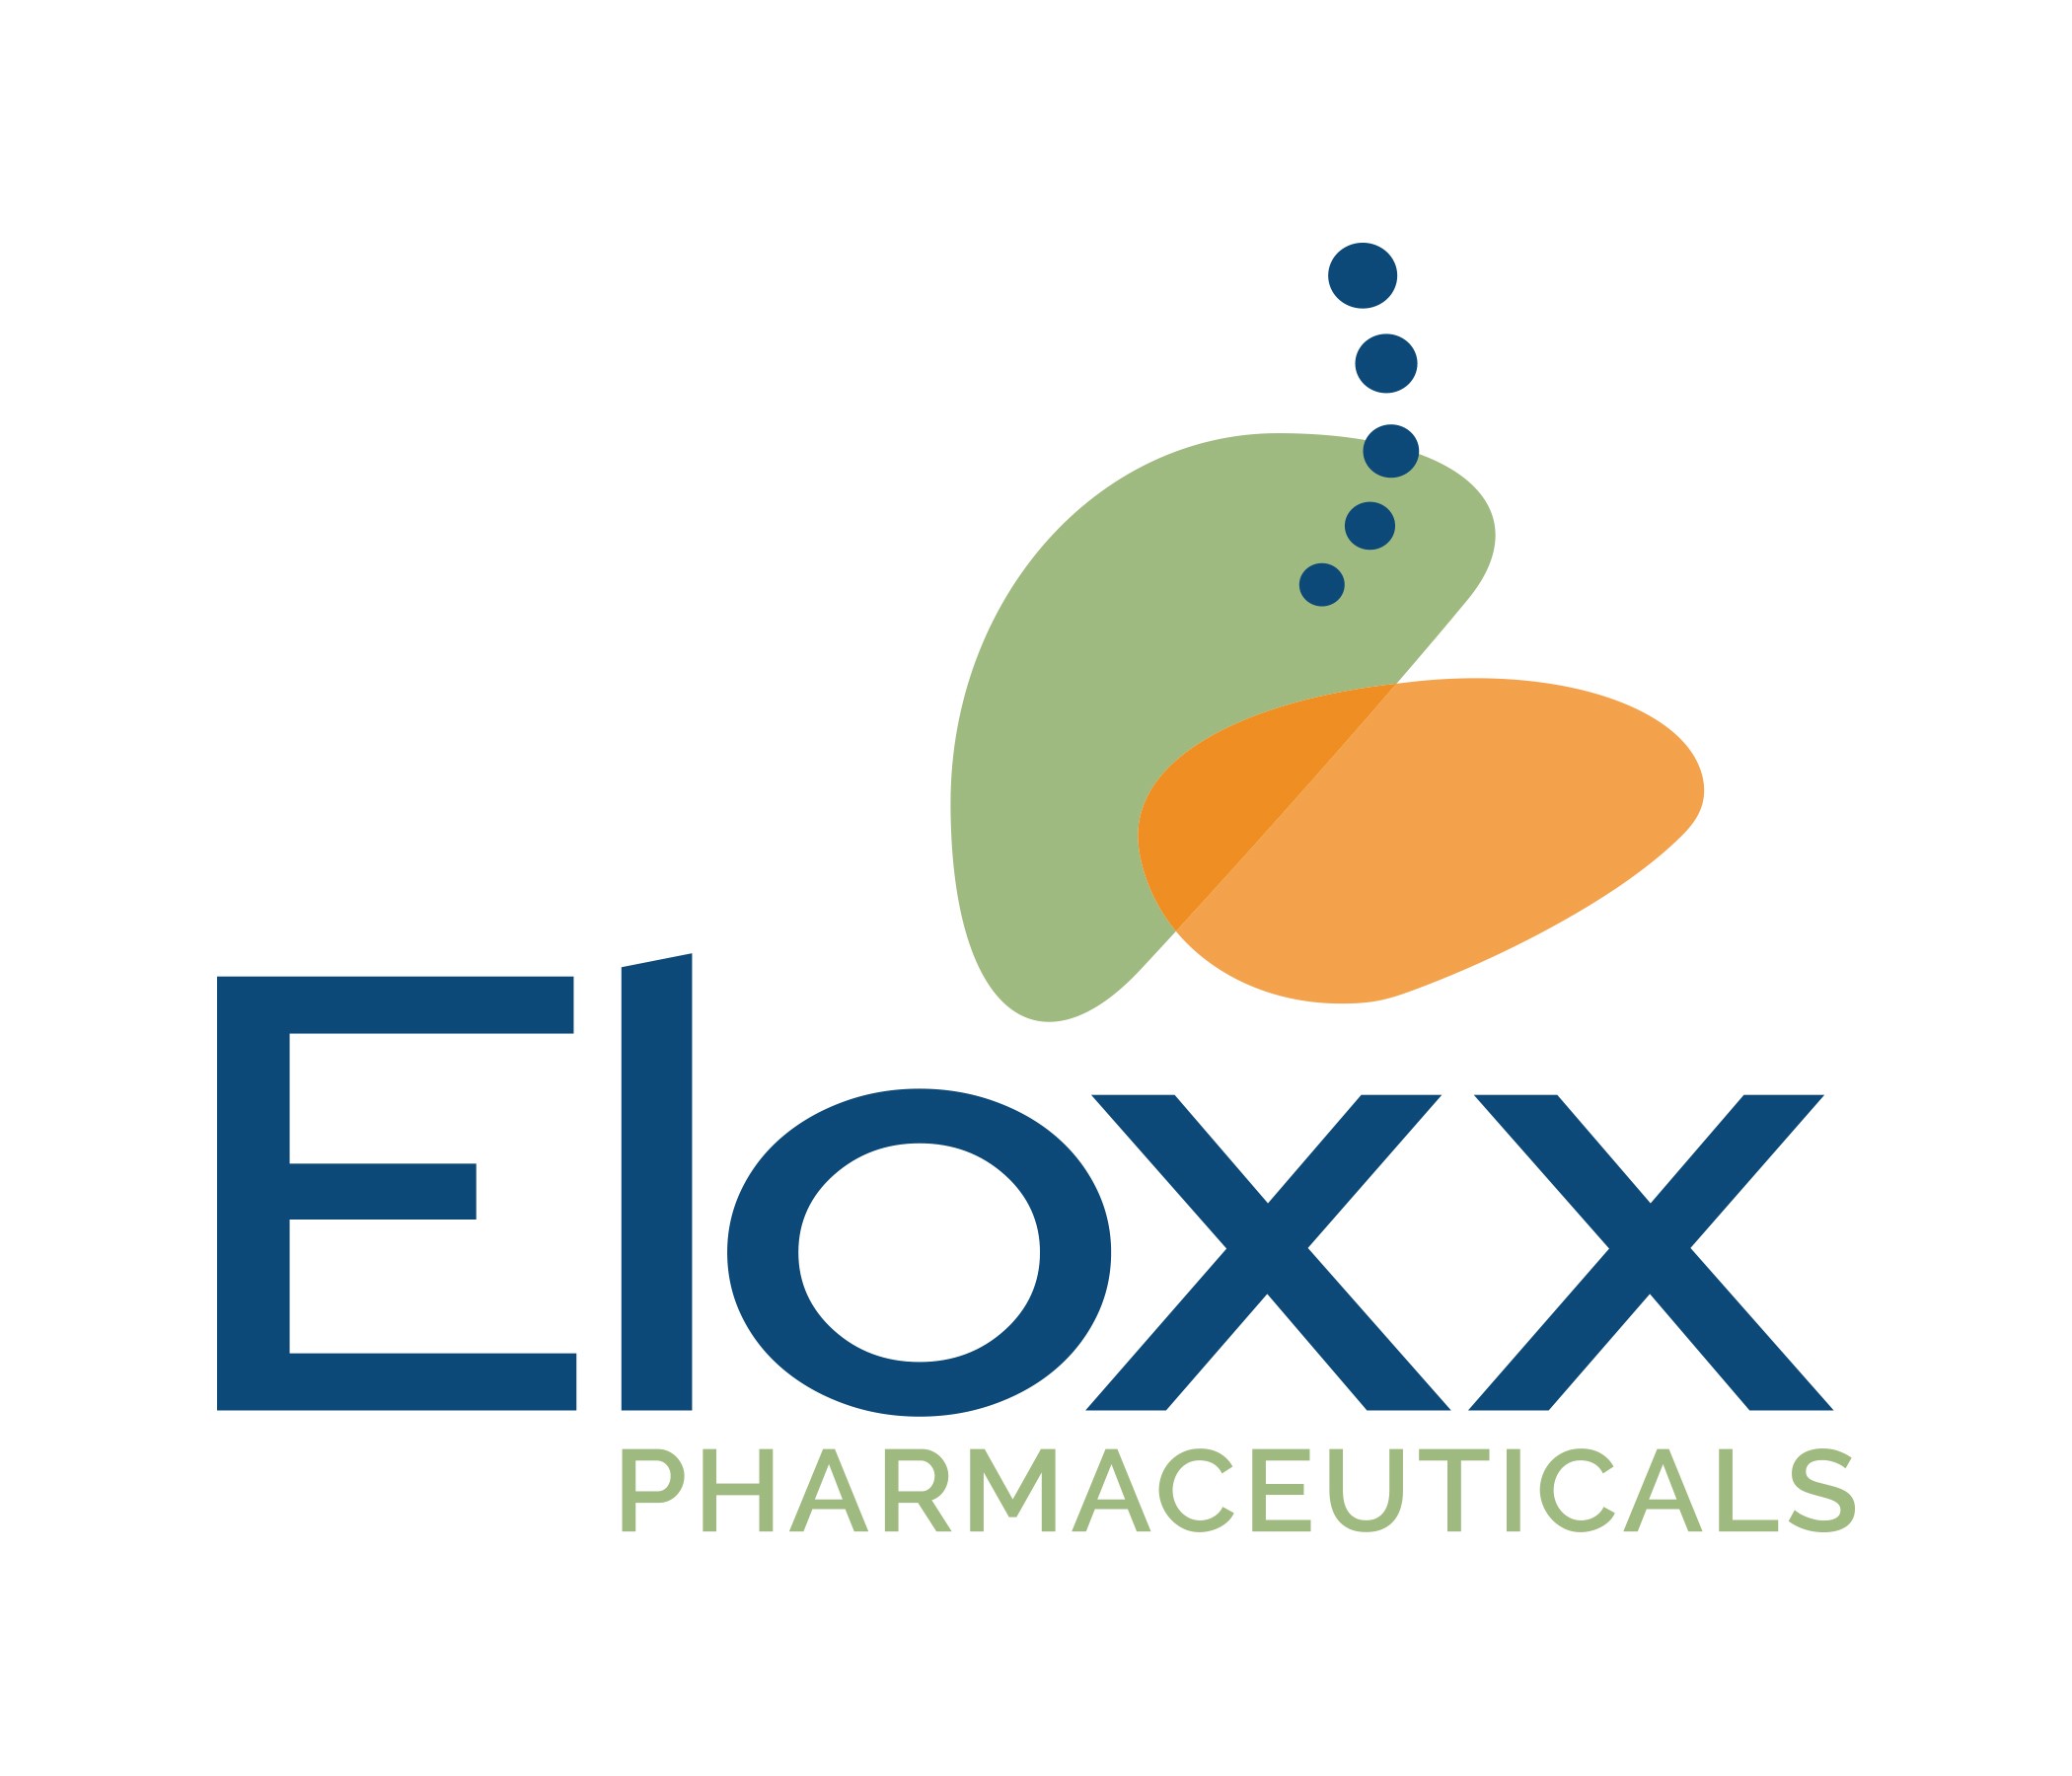 Eloxx Pharmaceuticals Announces Opening of Clinical Trial Sites for Phase 2 Study of ELX-02 for the Treatment of Alport Syndrome